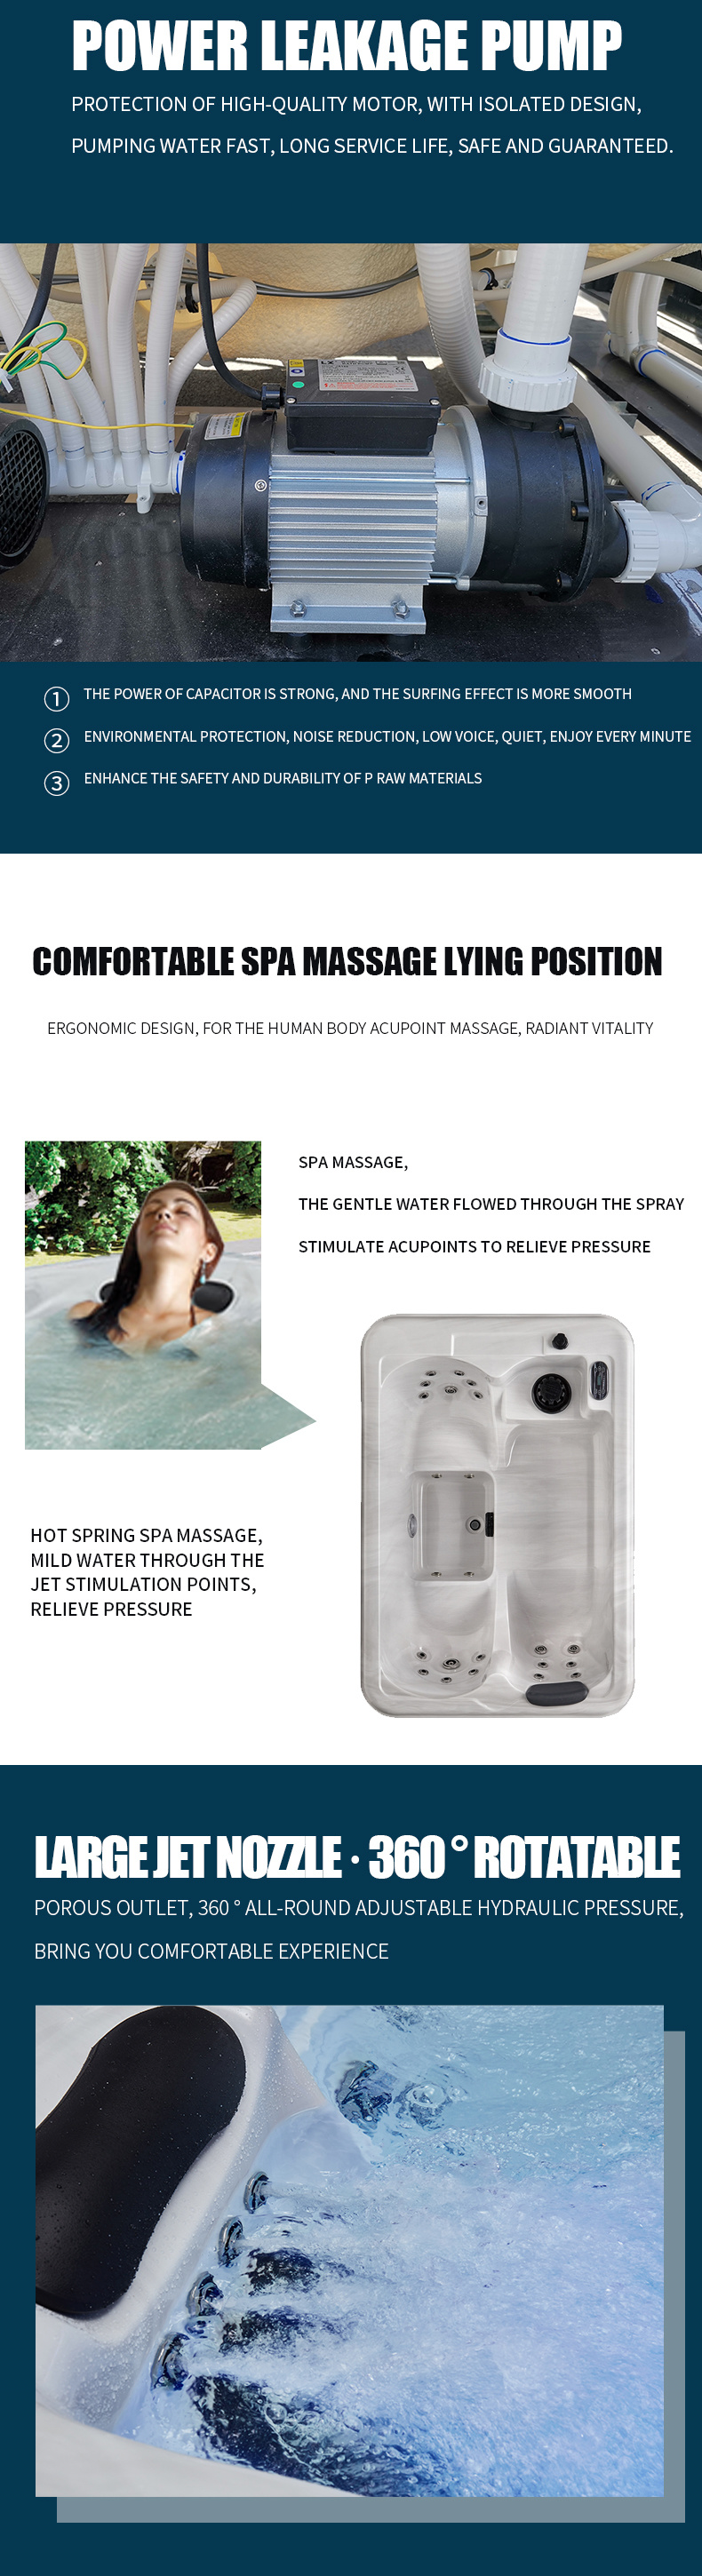 CE Certified Outdoor Jacuzzi Massage SPA with 2 Seats and 1 Lying